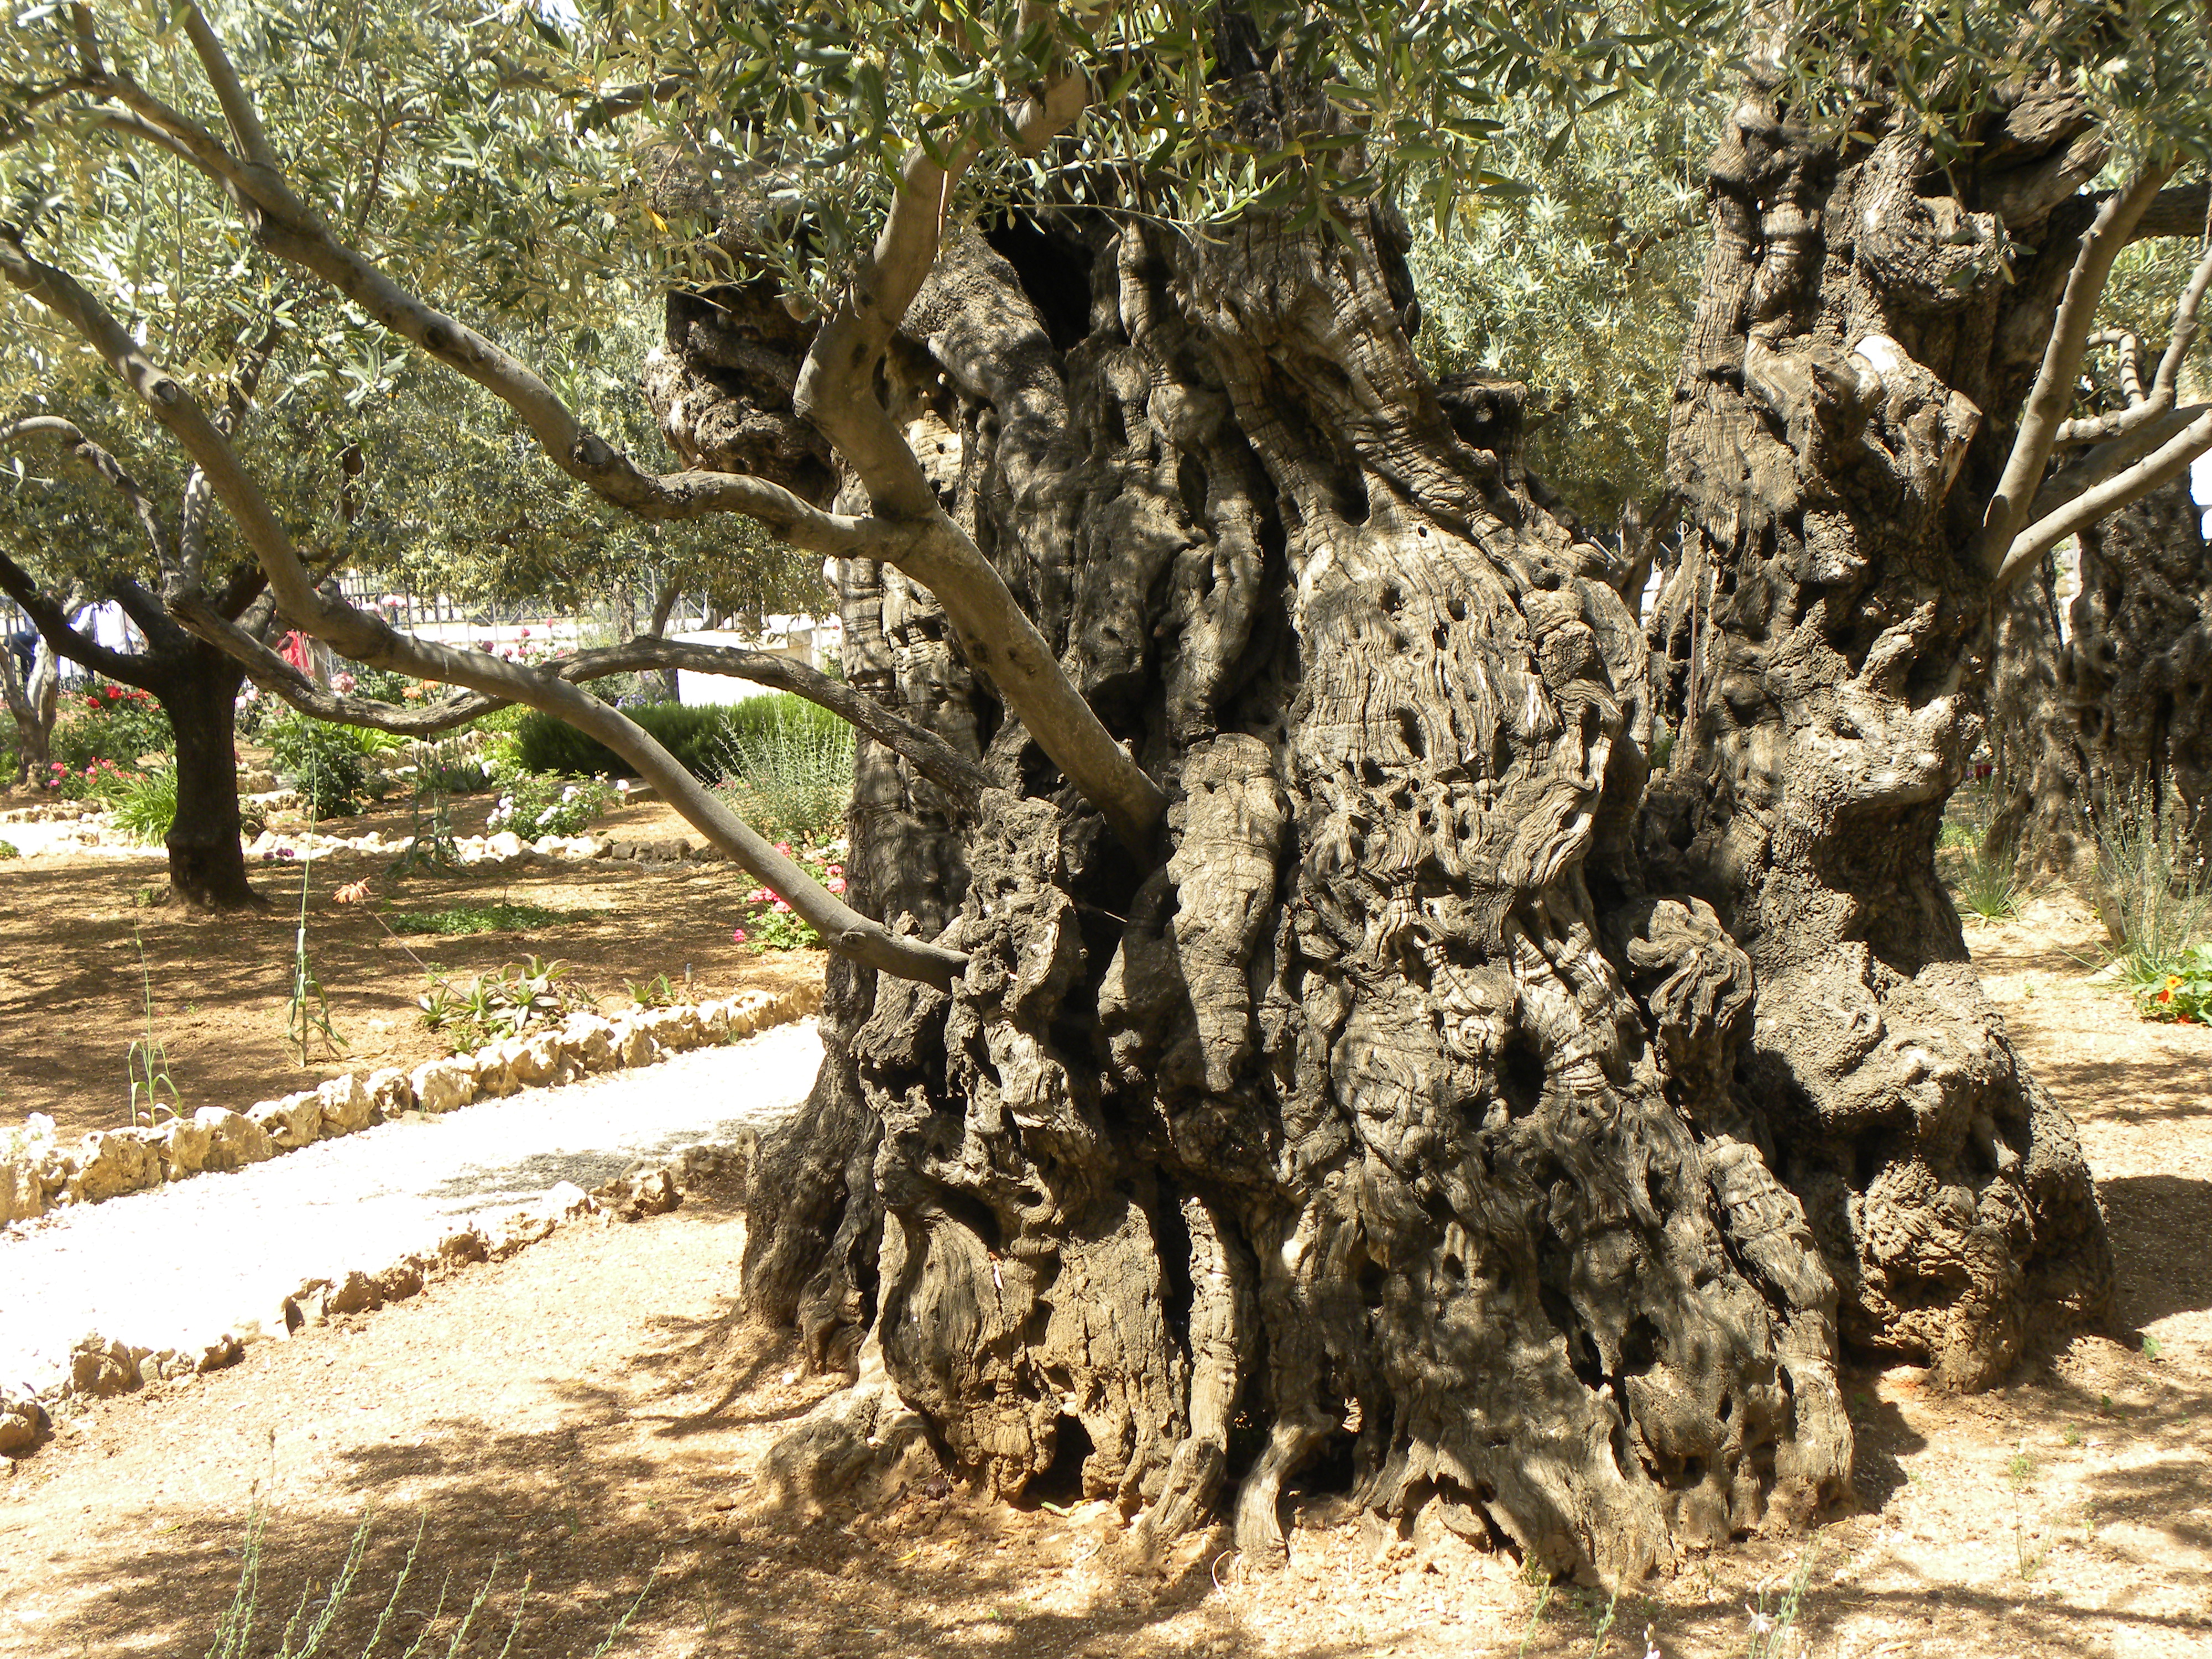 Olive trees in the traditional garden of Gethsemane (6409564287)